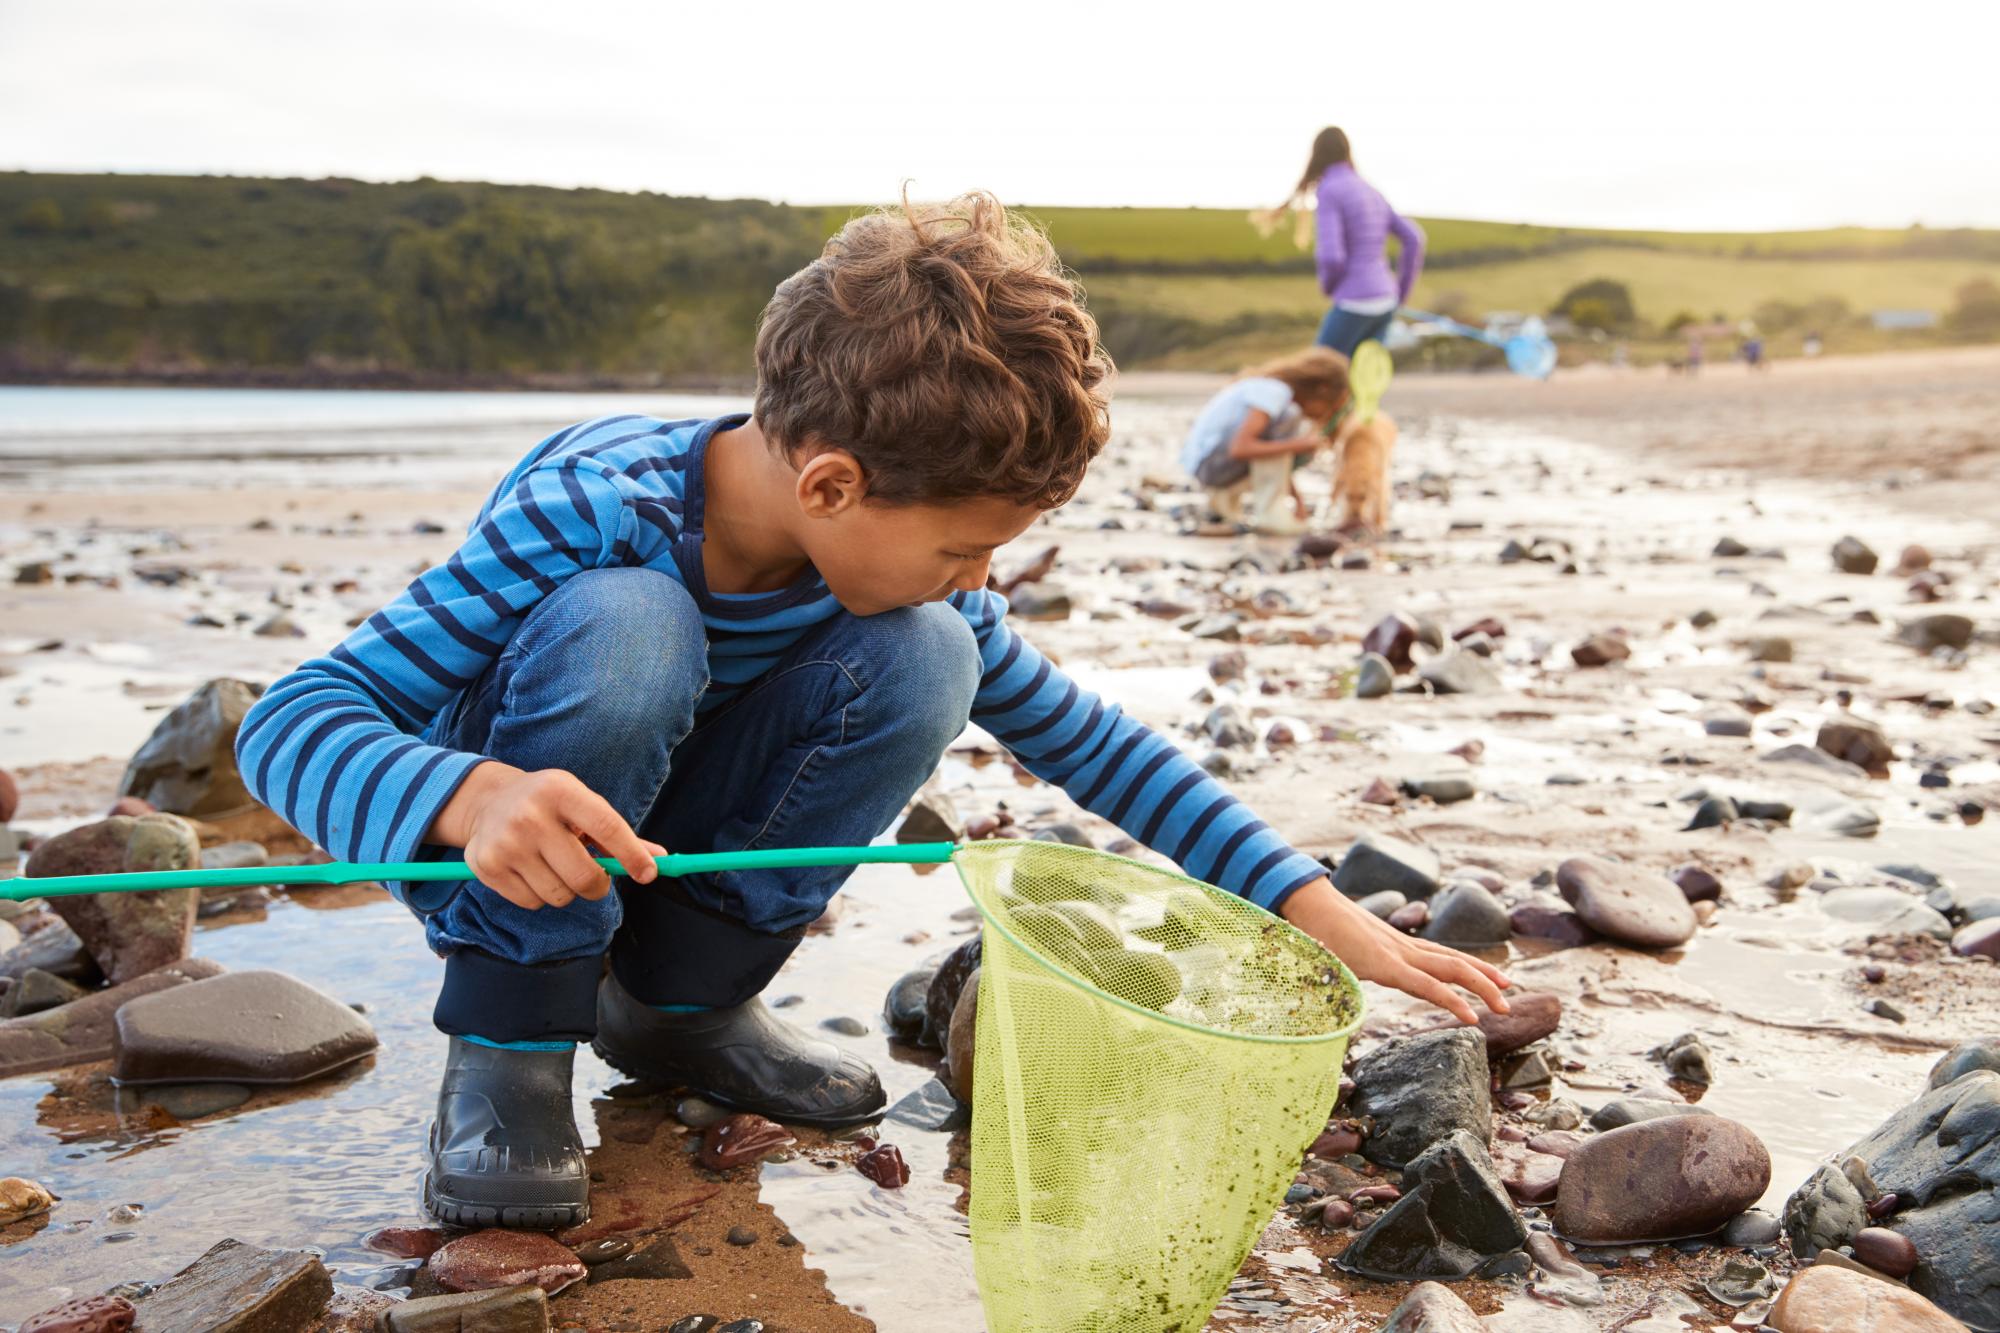 Children With Pet Dog Looking In Rockpools On Winter Beach holiday Adobe Stock for Make Space For Nature campaign